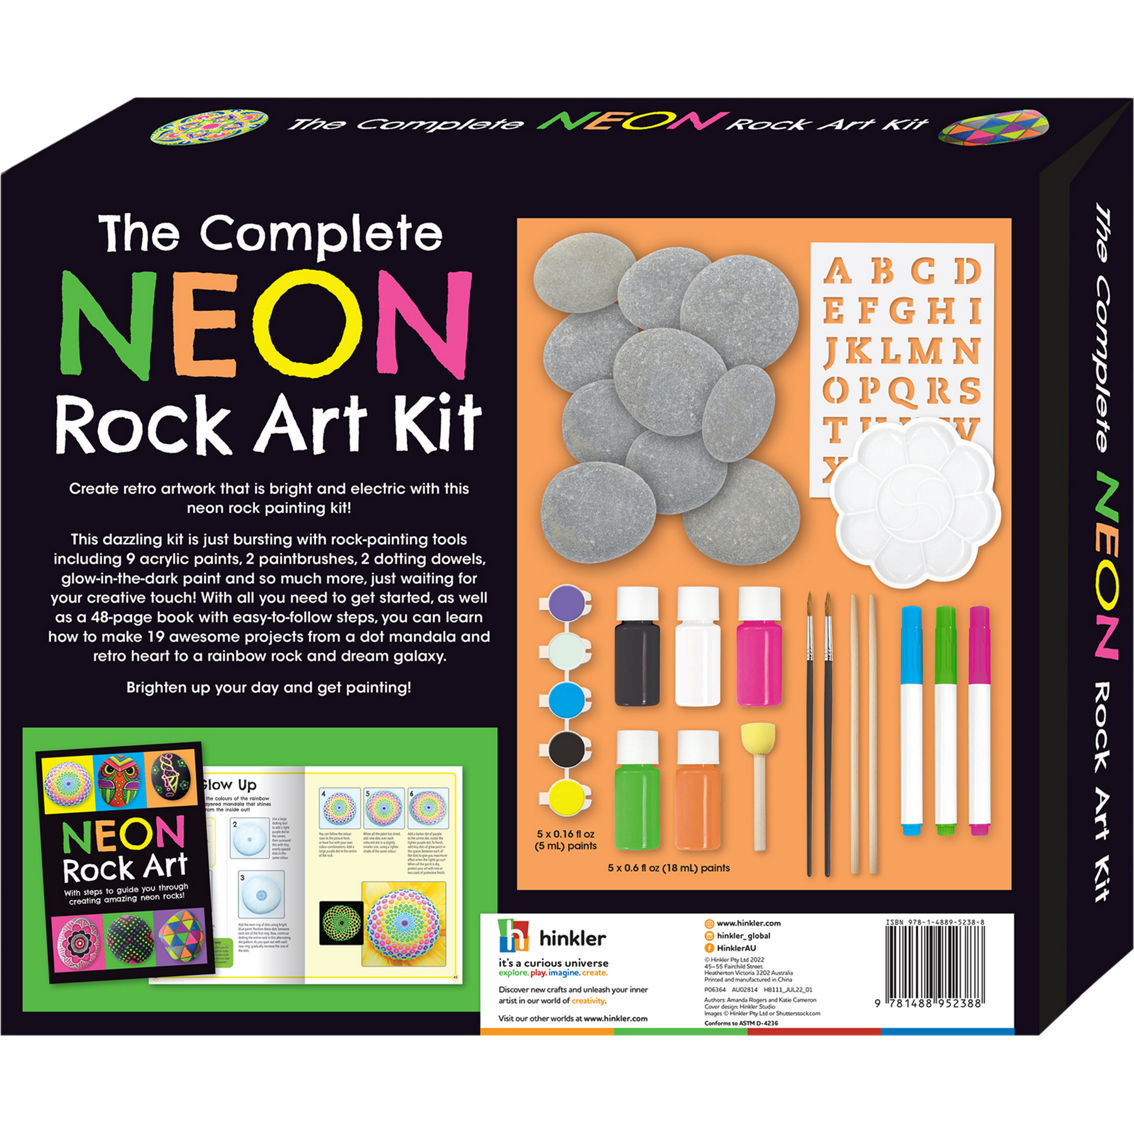 The Complete Neon Rock Art Kit - Image 2 of 6